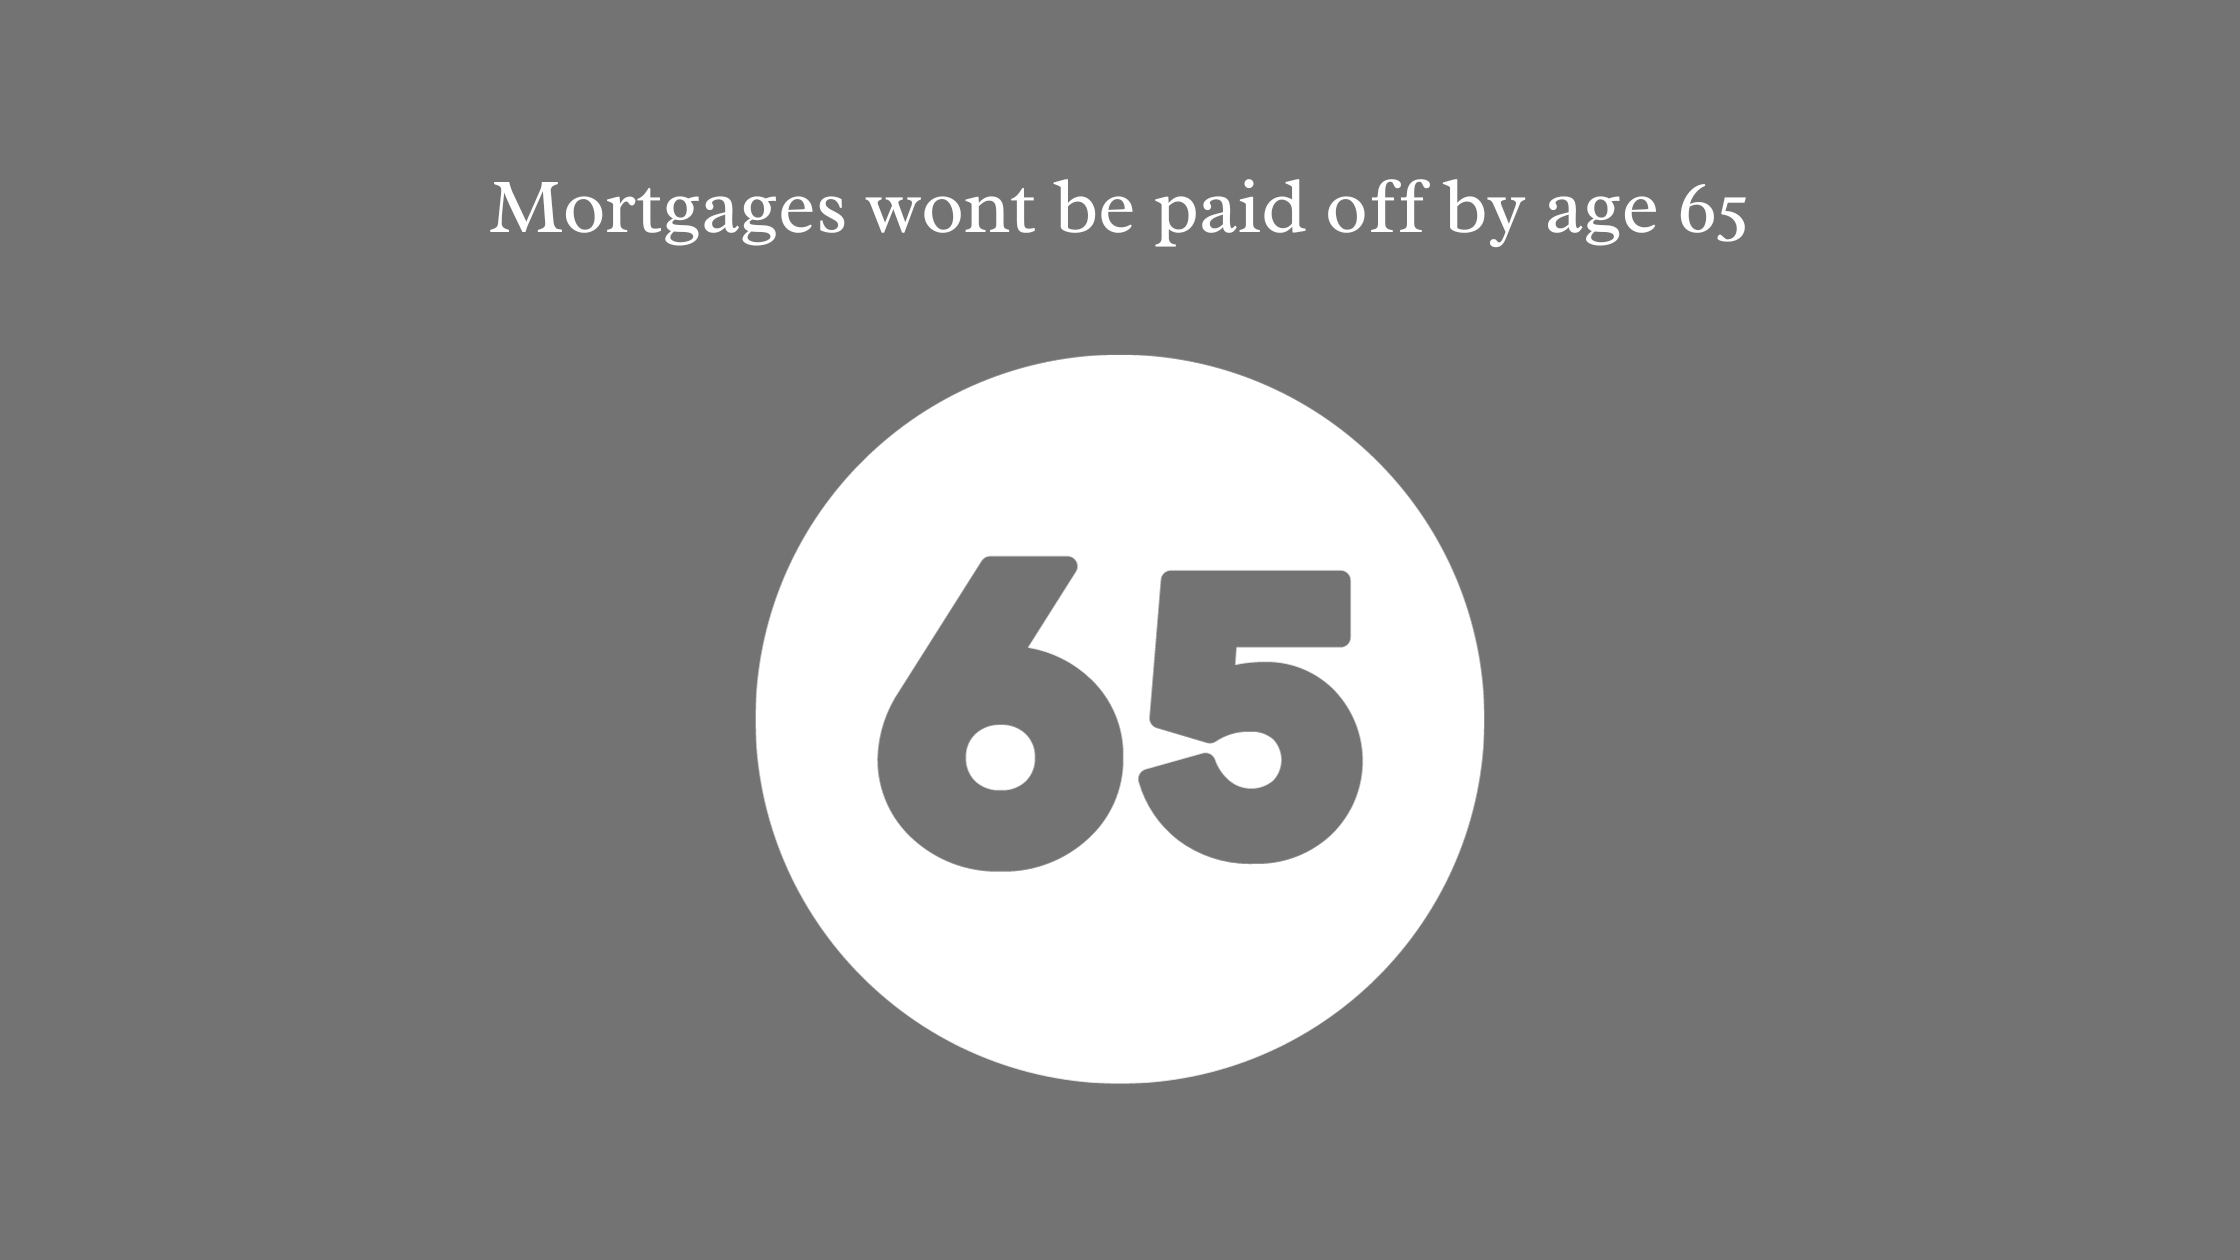 Mortgages won’t be paid off by age 65